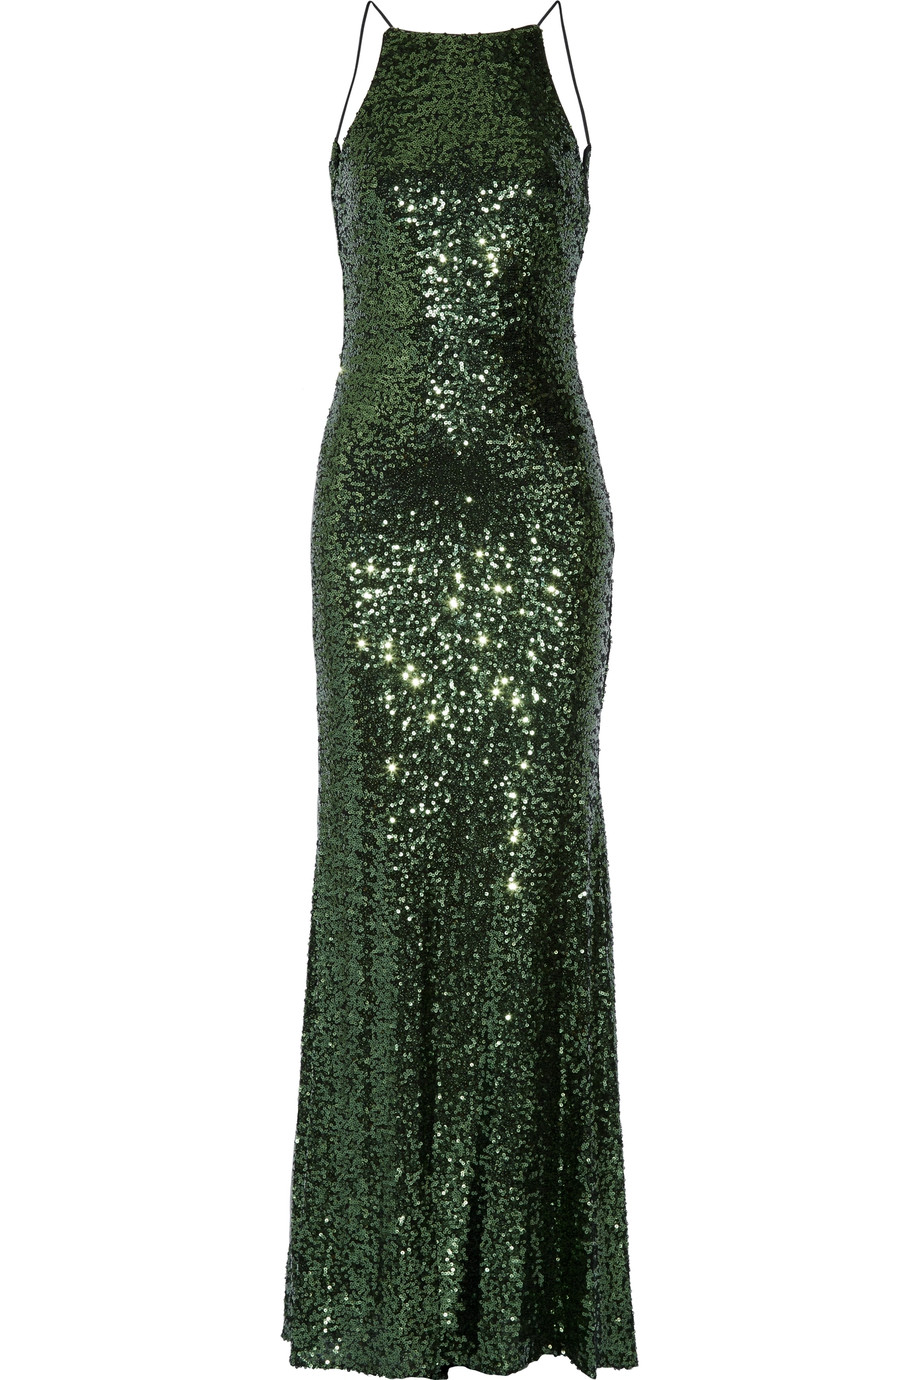 Badgley Mischka Draped Sequined Tulle Gown | ModeSens